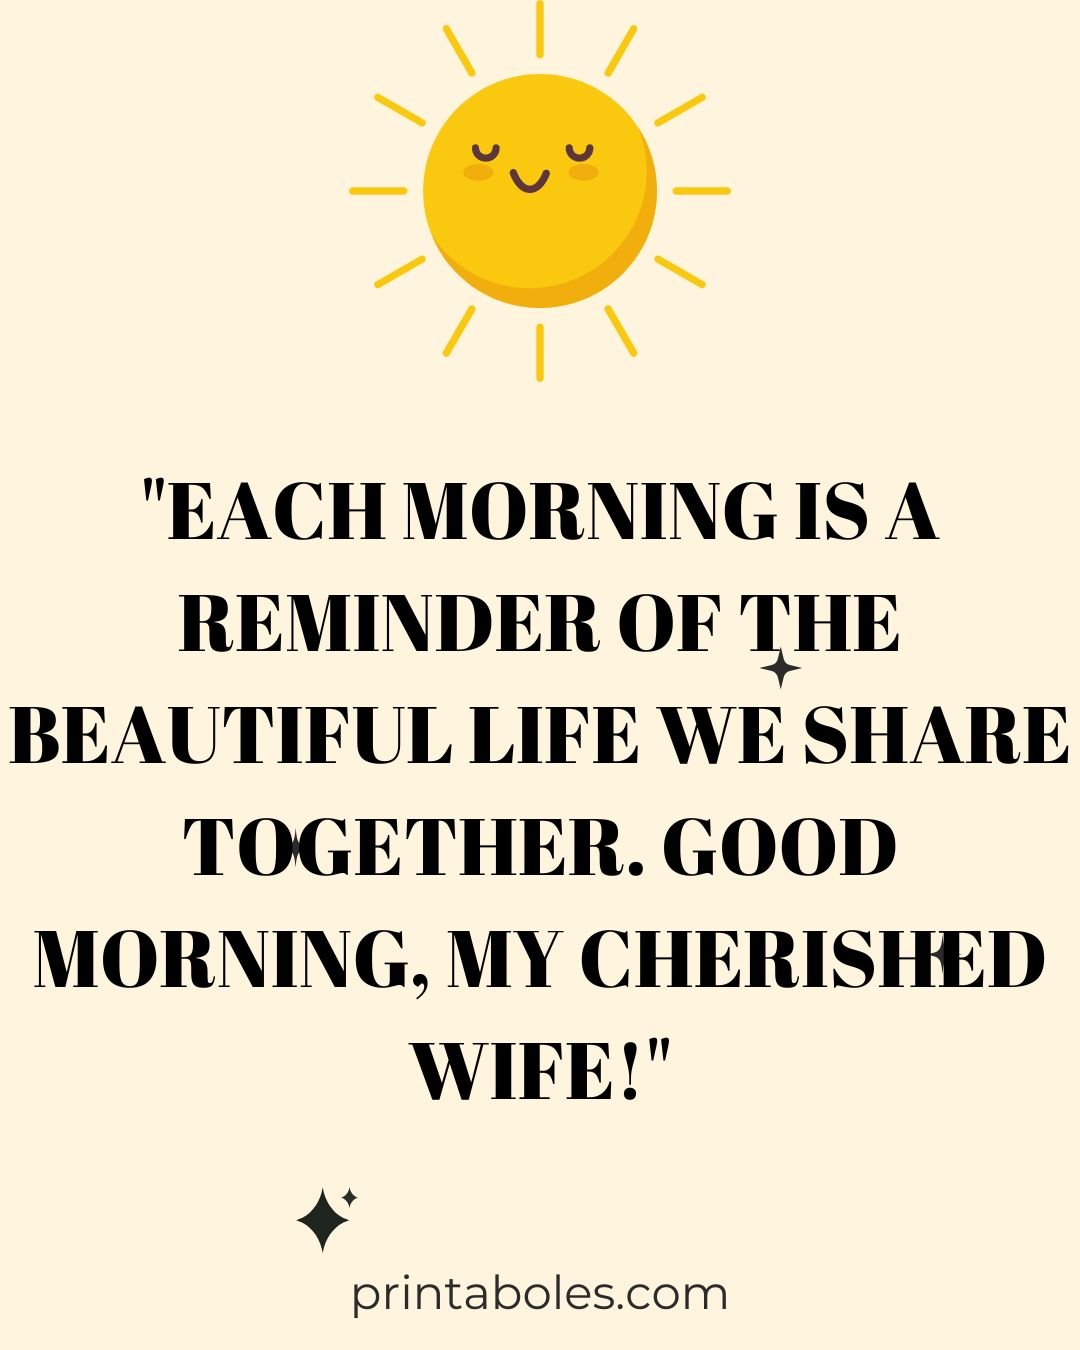 40 Printable Beautiful Good Morning Quotes for Her - Printaboles